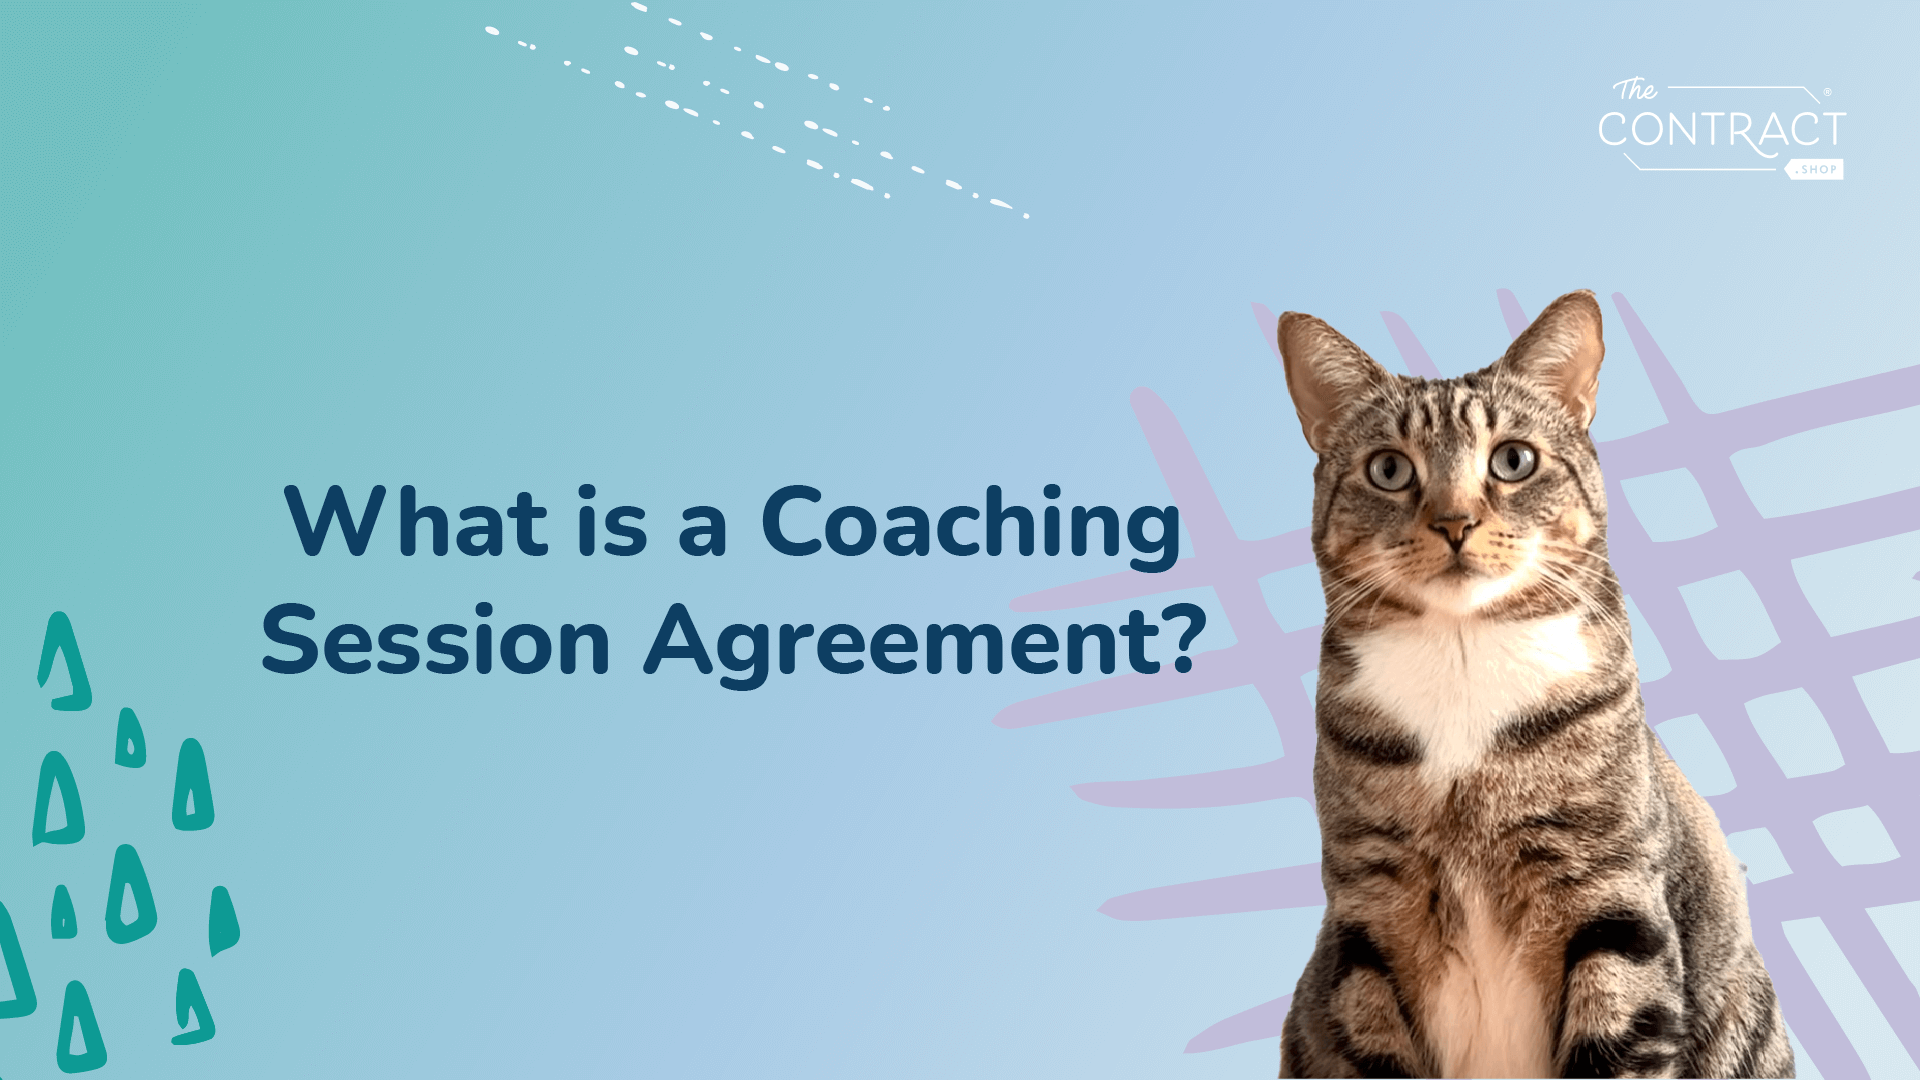 What is a Coaching Session Agreement?